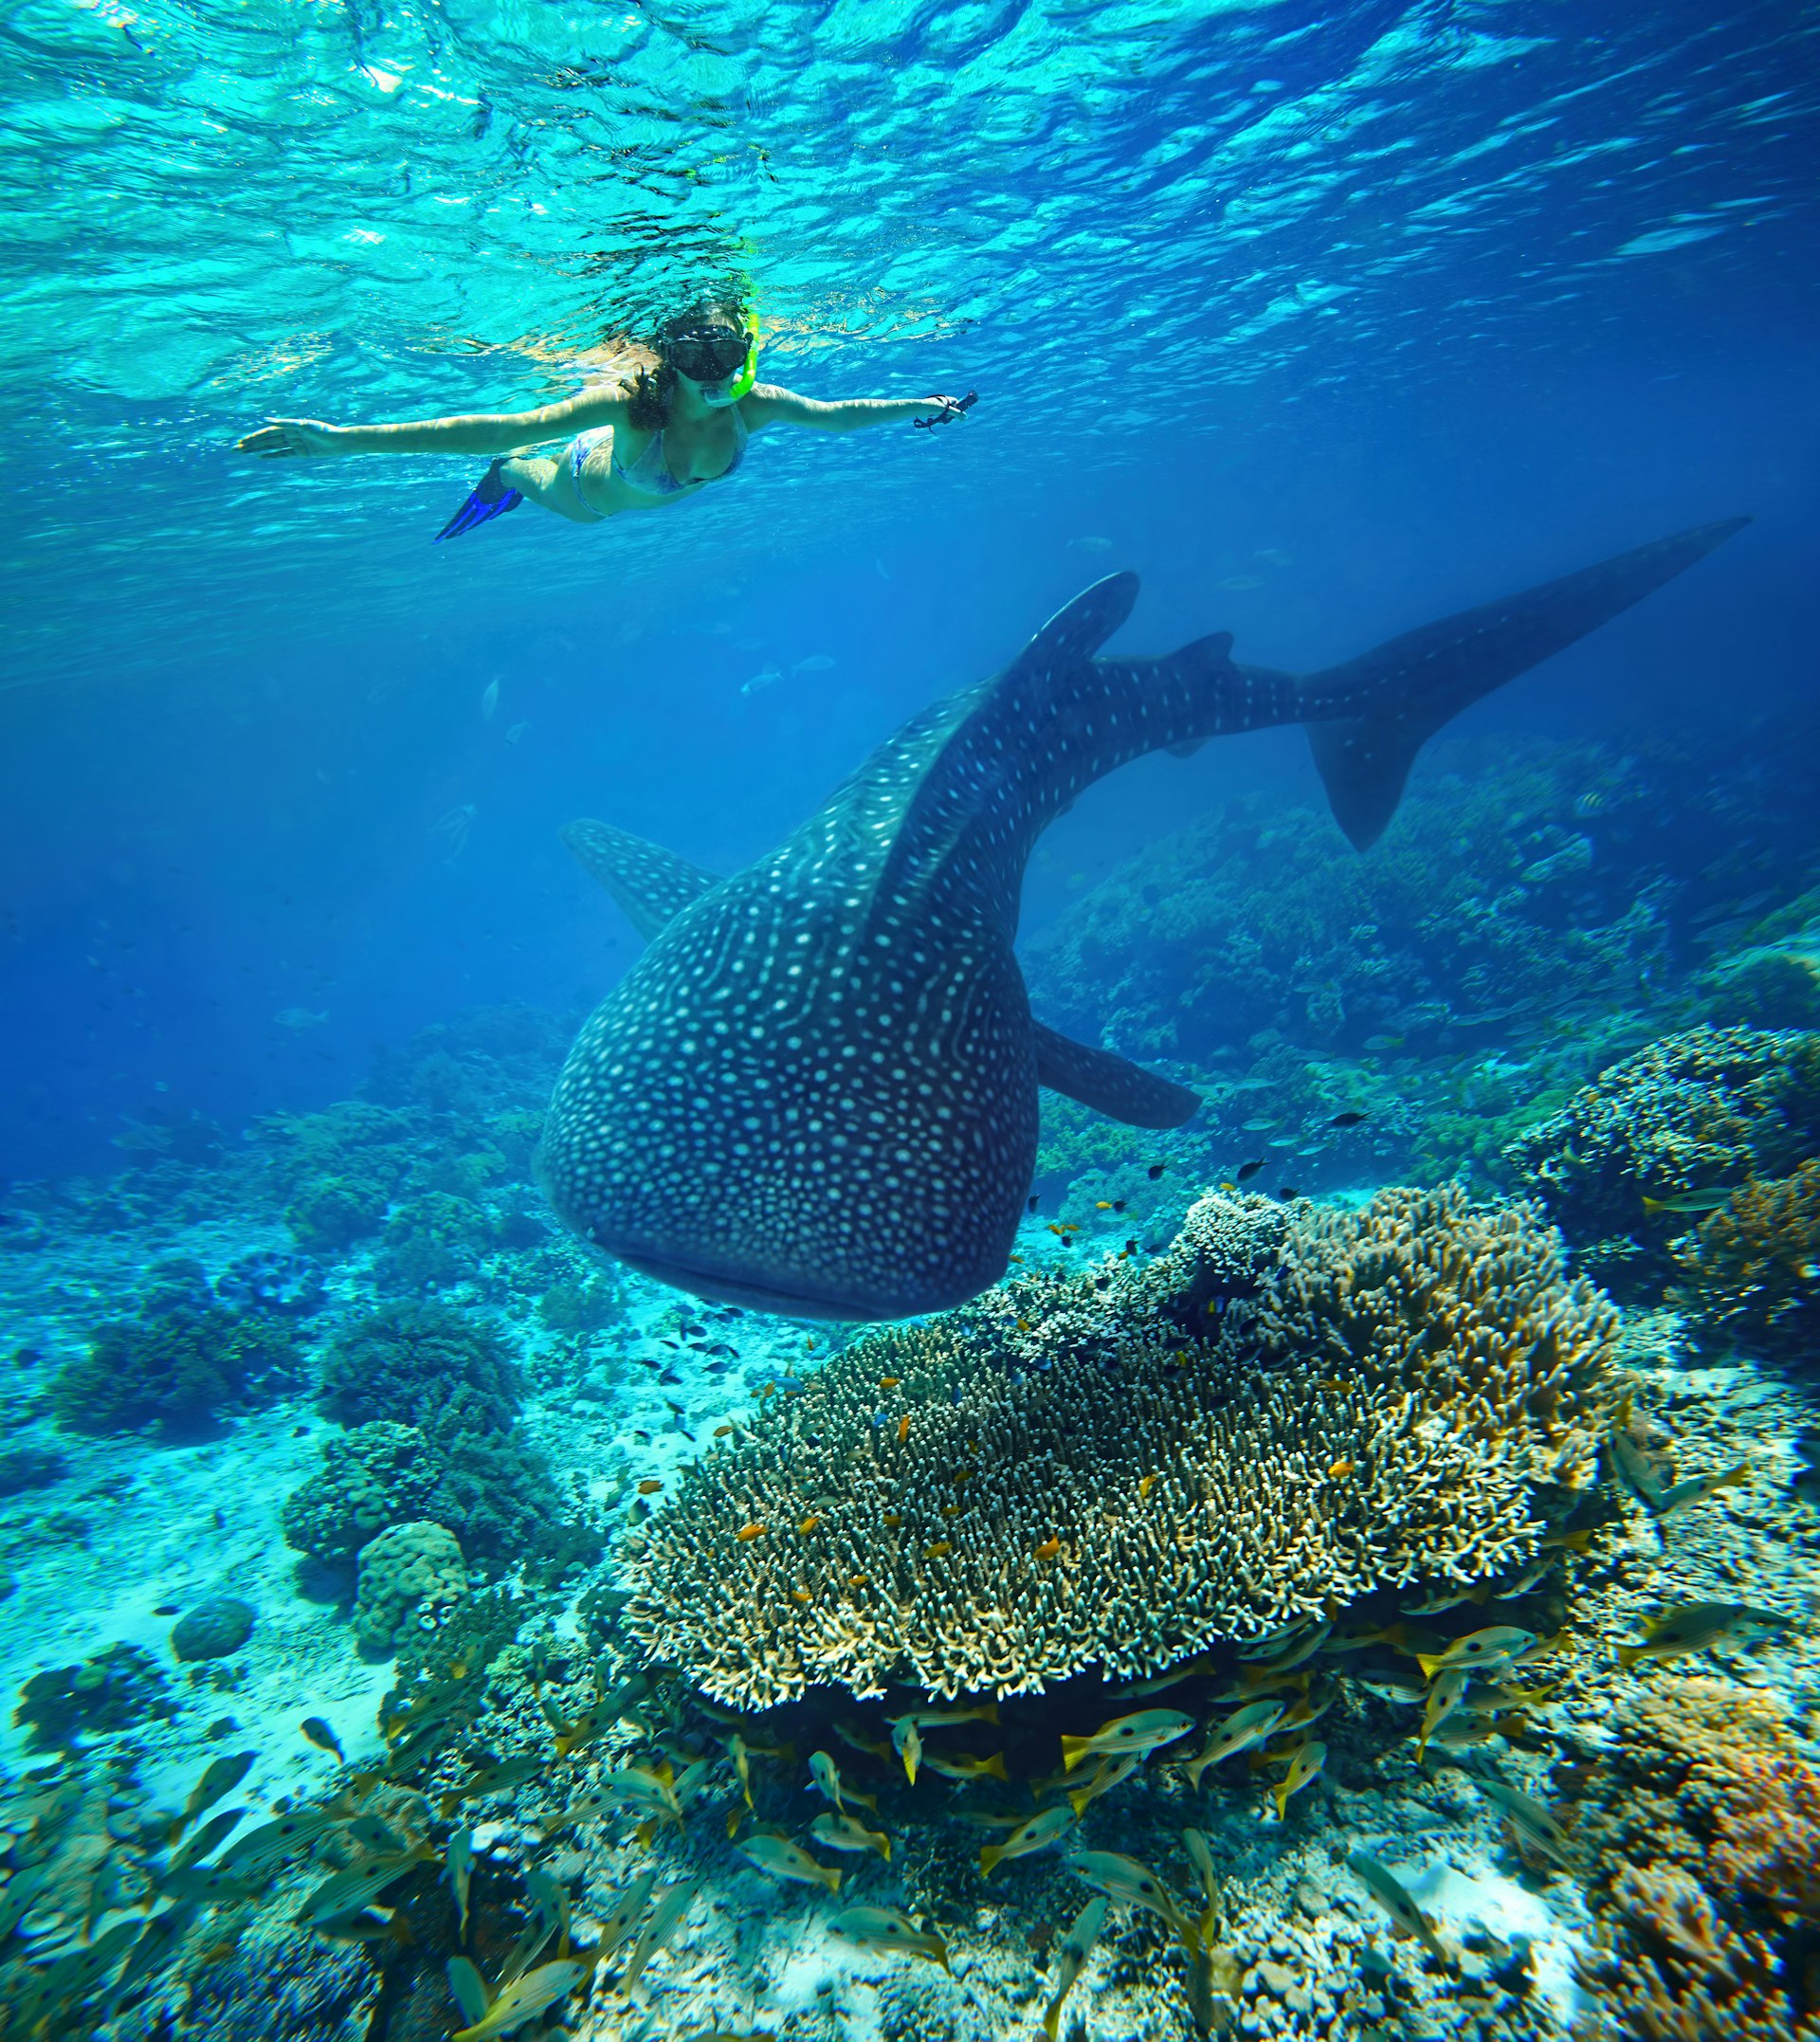 A young woman snorkeling underwater looks at a large whale shark in the Philippines